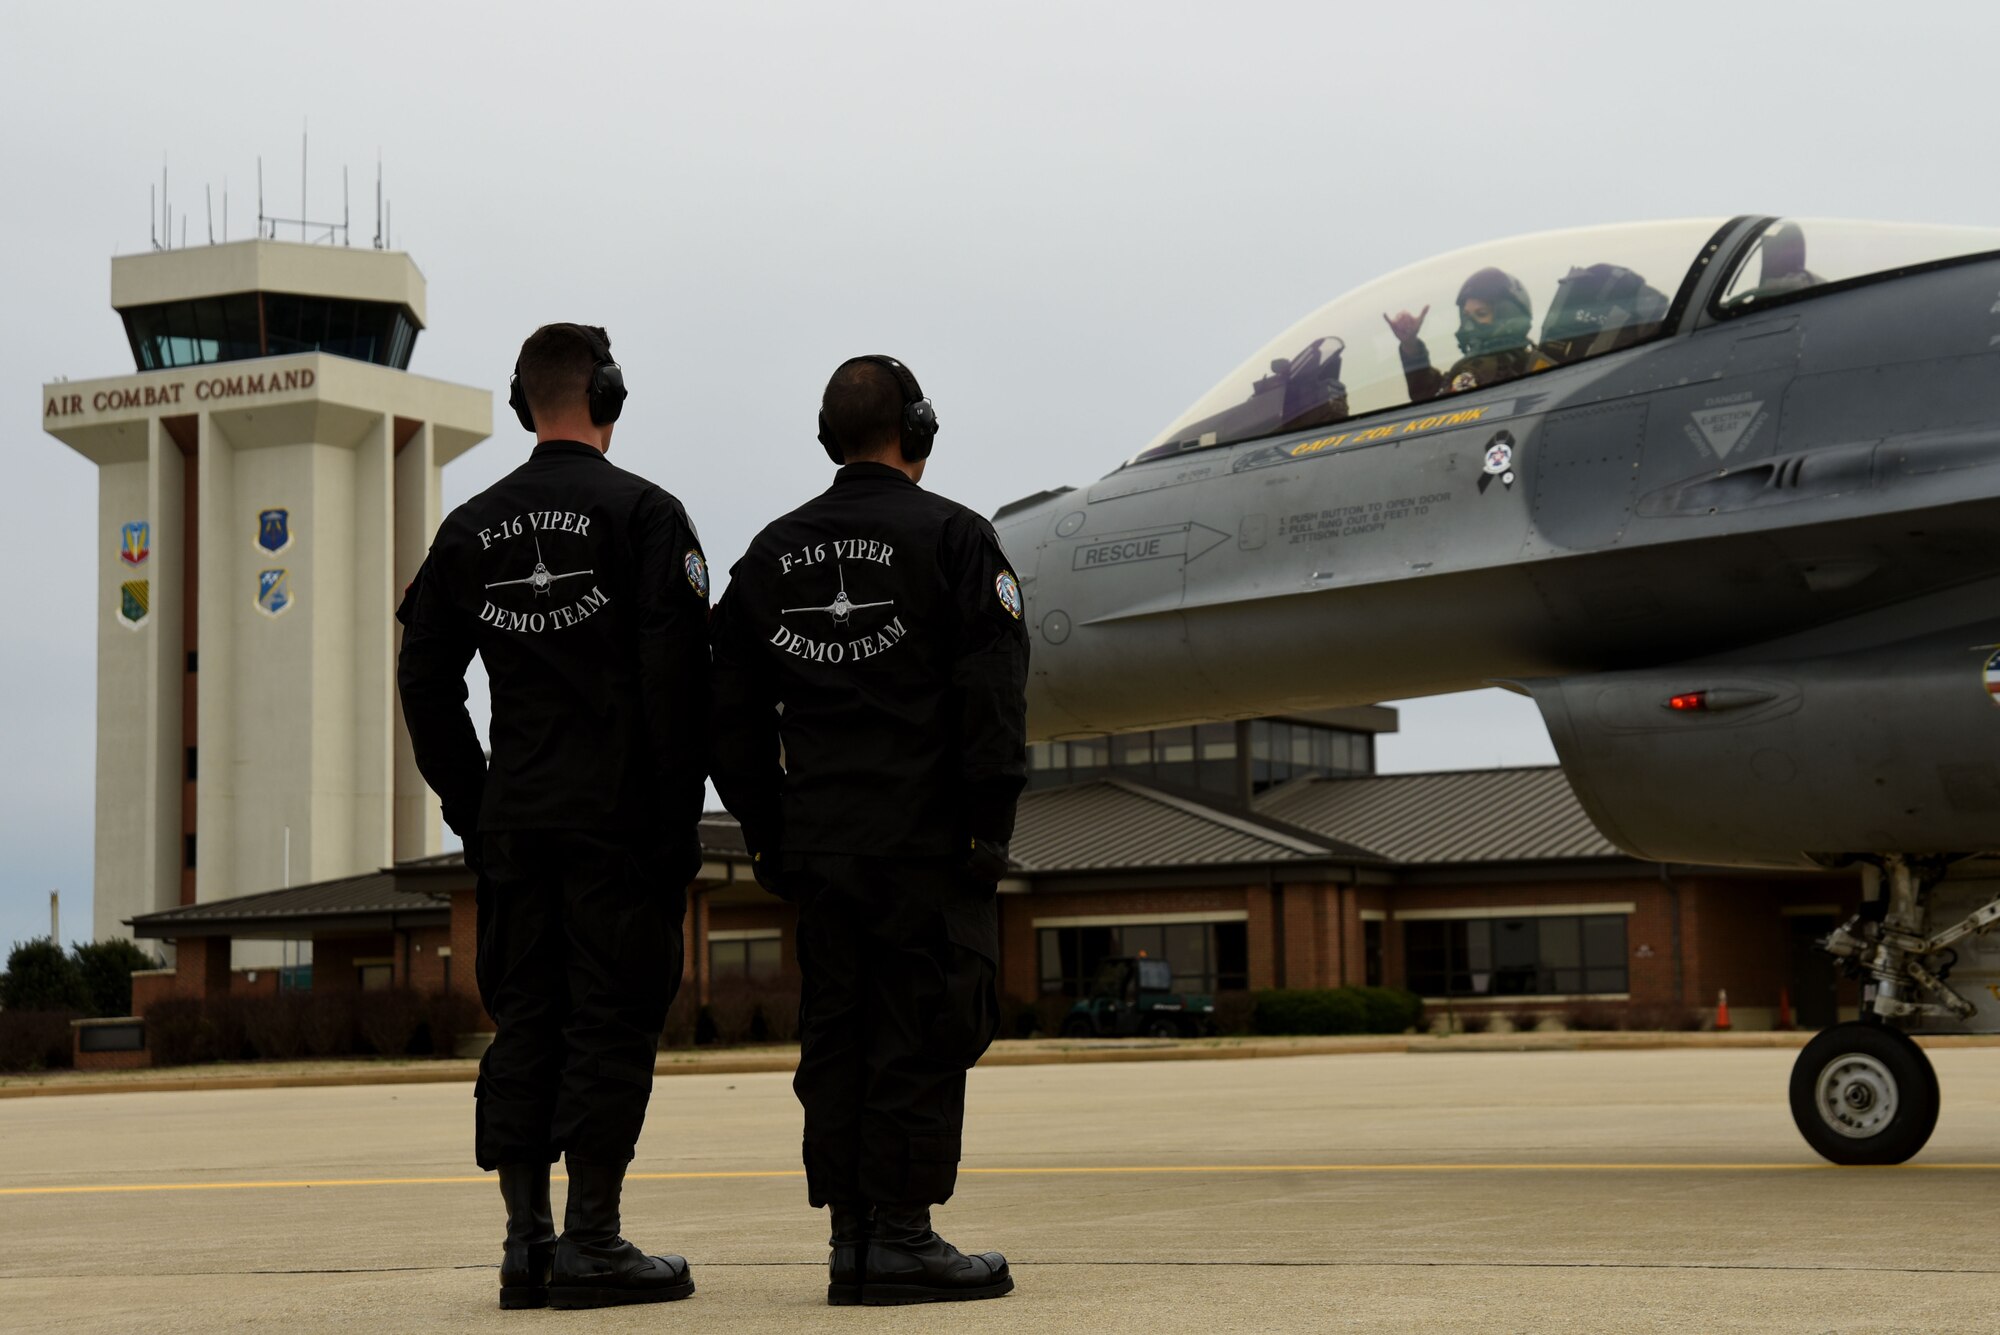 U.S. Air Force Staff Sgt. Austin Dixon, F-16 Viper Demonstration Team (VDT) dedicated crew chief, left, and Staff Sgt. Ryan Davis, F-16 VDT aerospace propulsion craftsman, stand beside Capt. Zoe “SiS” Kotnik, F-16 VDT commander and pilot, as she taxis her F-16CM Fighting Falcon on the flight line at Joint Base Langley-Eustice, Va., Jan. 28, 2019.